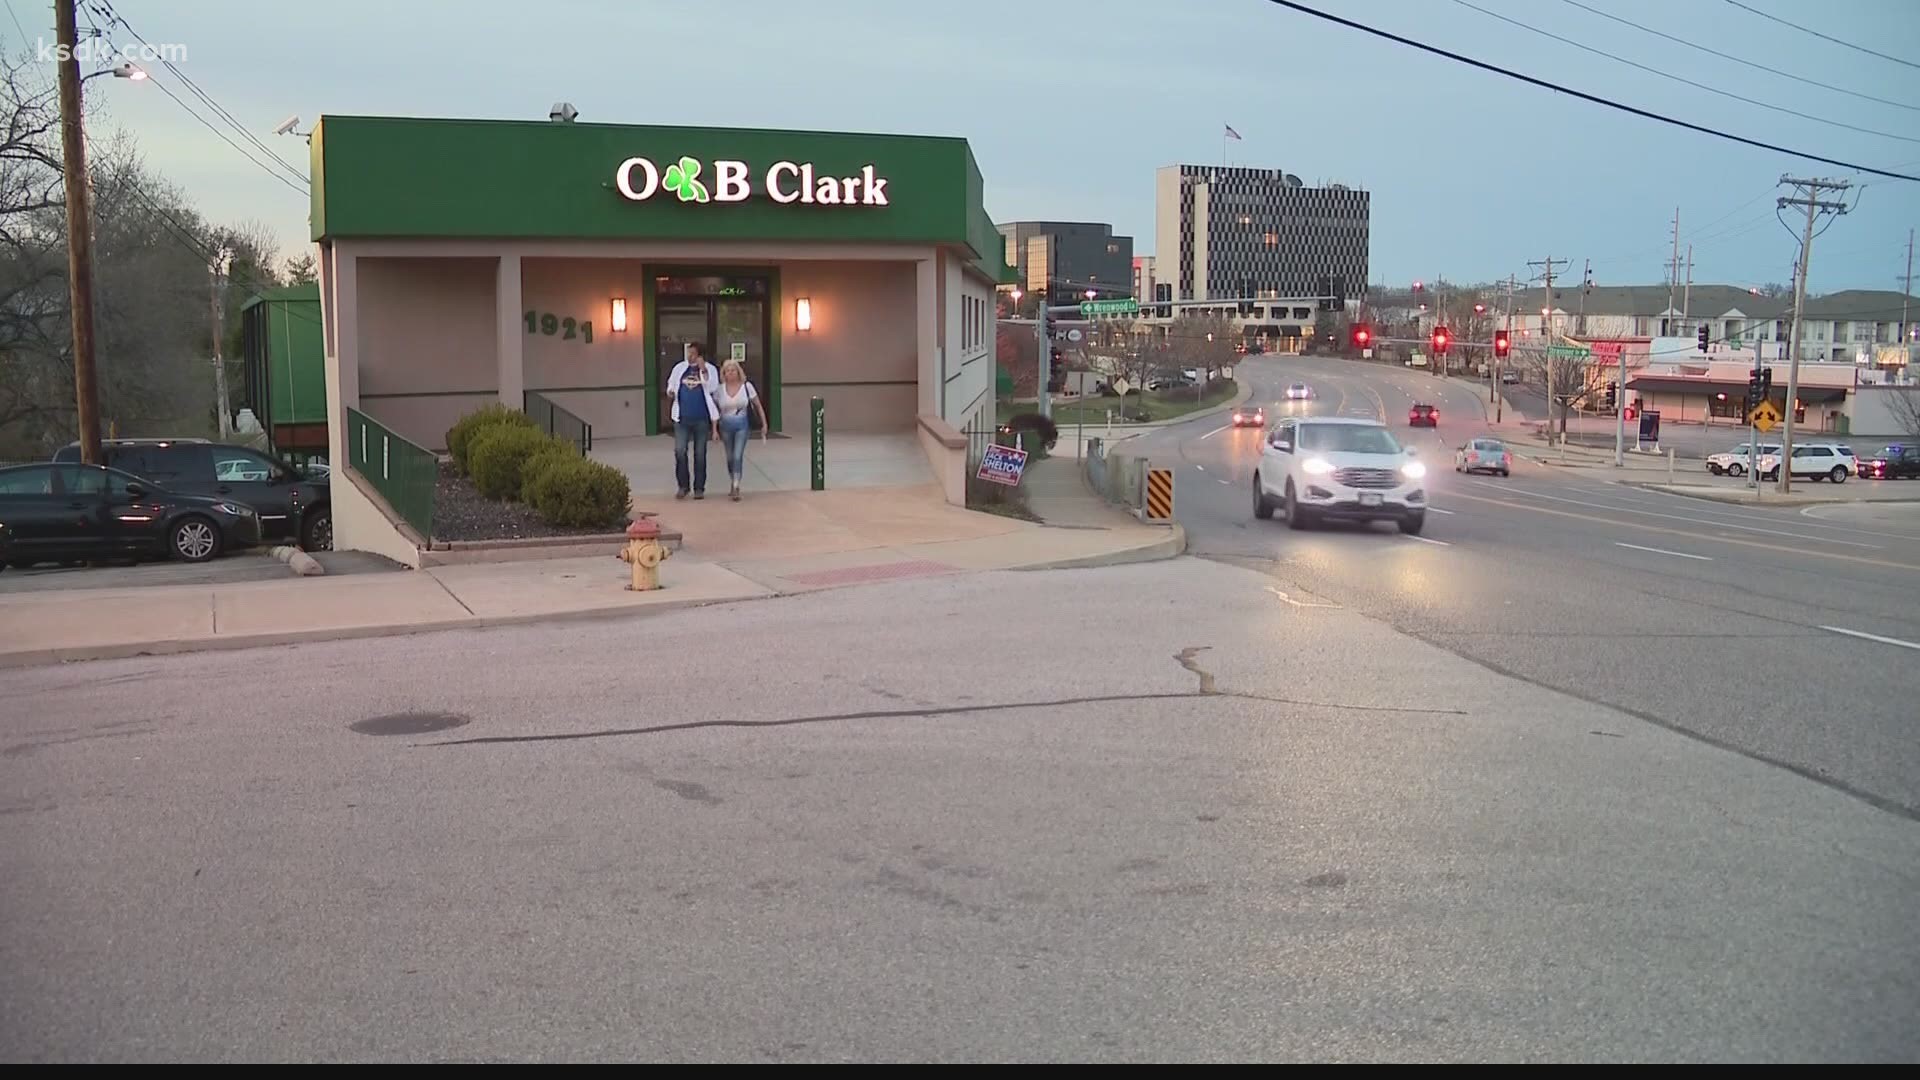 OB Clark's is one of the bars and restaurants asking that people still keep their masks on as they head to their tables.